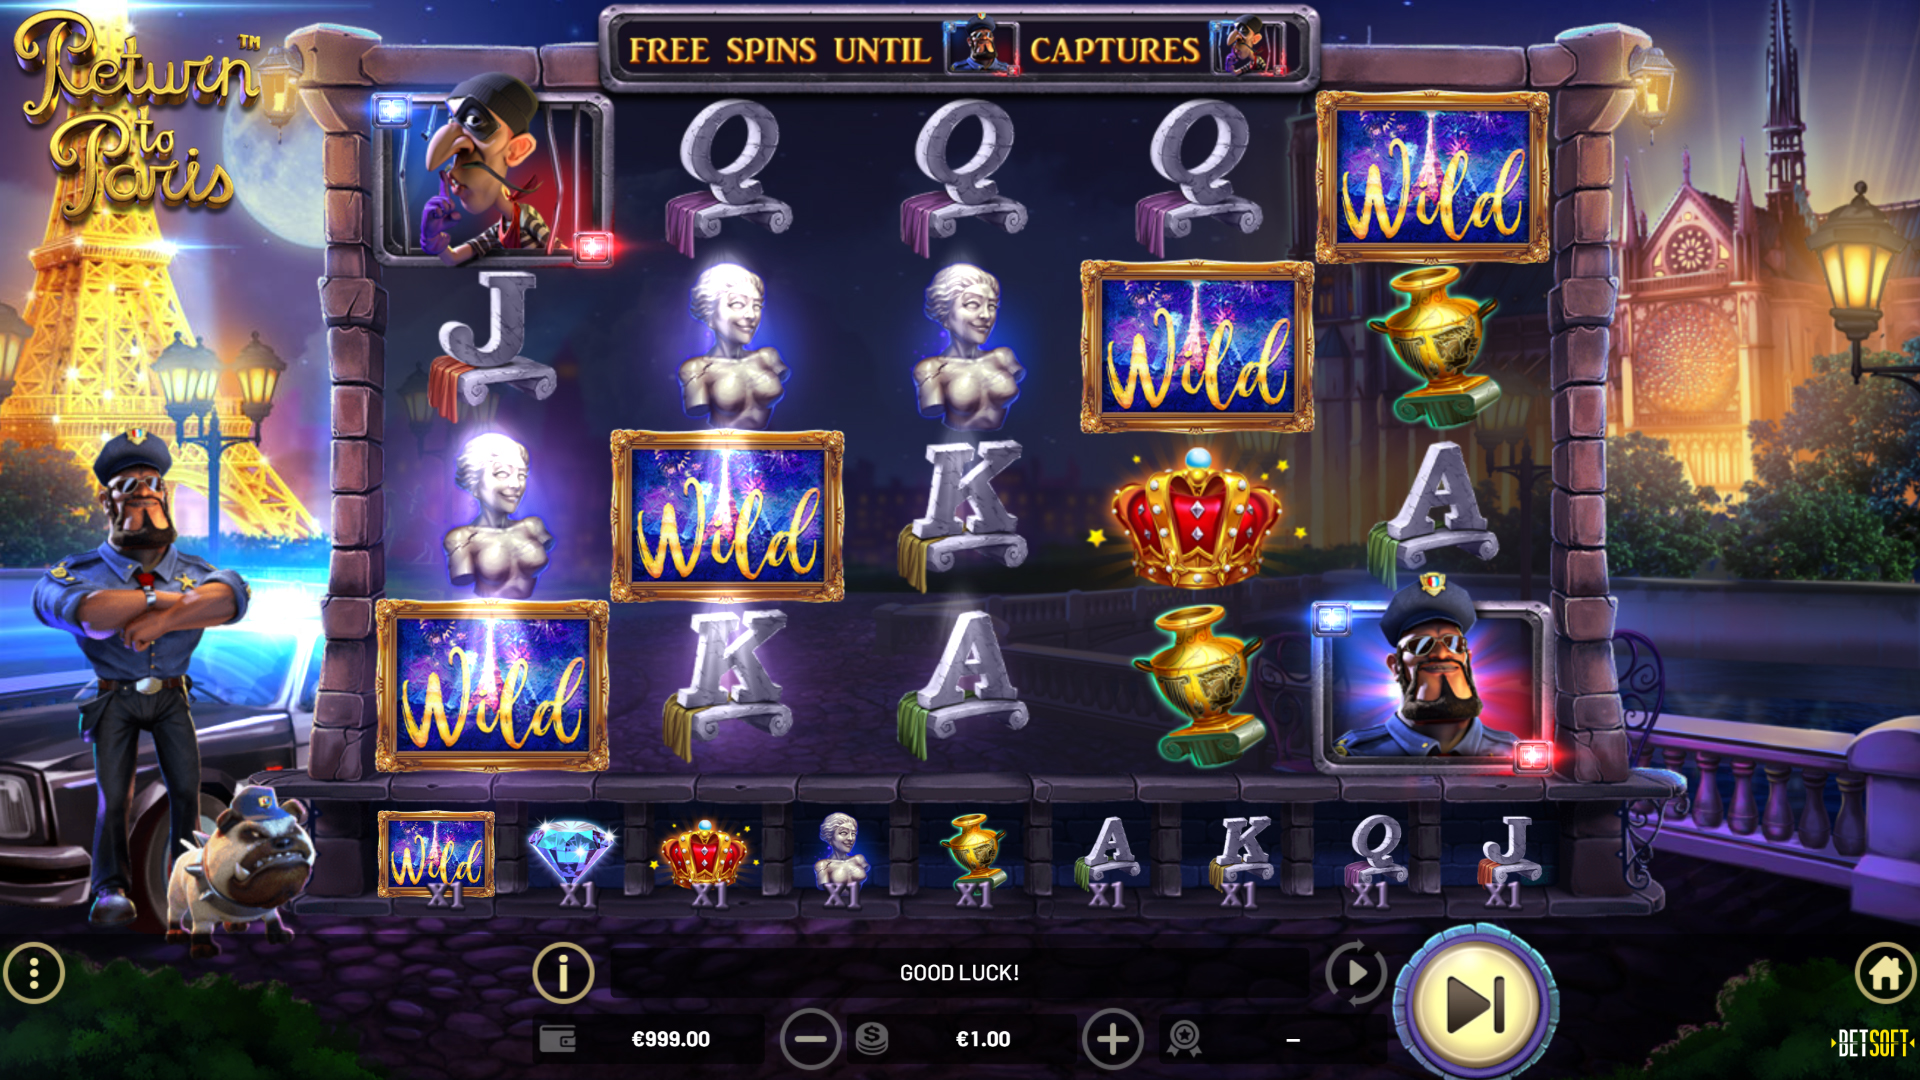 Return To Paris - Open Ended Free Spins